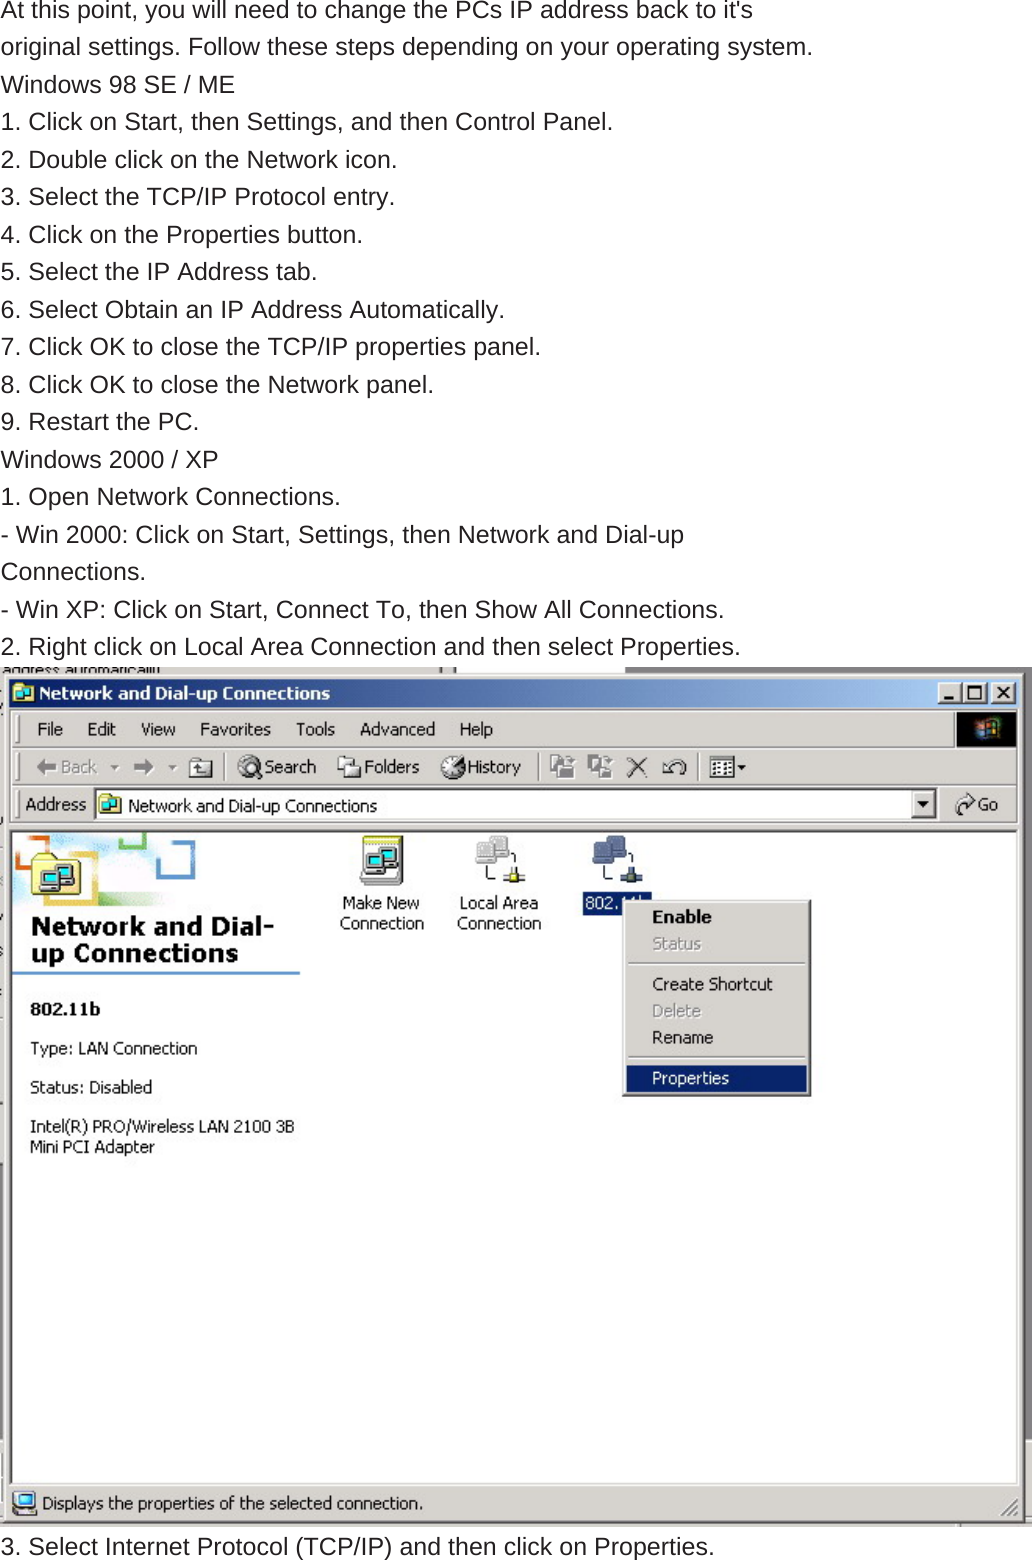  At this point, you will need to change the PCs IP address back to it&apos;s original settings. Follow these steps depending on your operating system. Windows 98 SE / ME 1. Click on Start, then Settings, and then Control Panel. 2. Double click on the Network icon. 3. Select the TCP/IP Protocol entry. 4. Click on the Properties button. 5. Select the IP Address tab. 6. Select Obtain an IP Address Automatically. 7. Click OK to close the TCP/IP properties panel. 8. Click OK to close the Network panel. 9. Restart the PC. Windows 2000 / XP 1. Open Network Connections. - Win 2000: Click on Start, Settings, then Network and Dial-up Connections. - Win XP: Click on Start, Connect To, then Show All Connections. 2. Right click on Local Area Connection and then select Properties.  3. Select Internet Protocol (TCP/IP) and then click on Properties. 